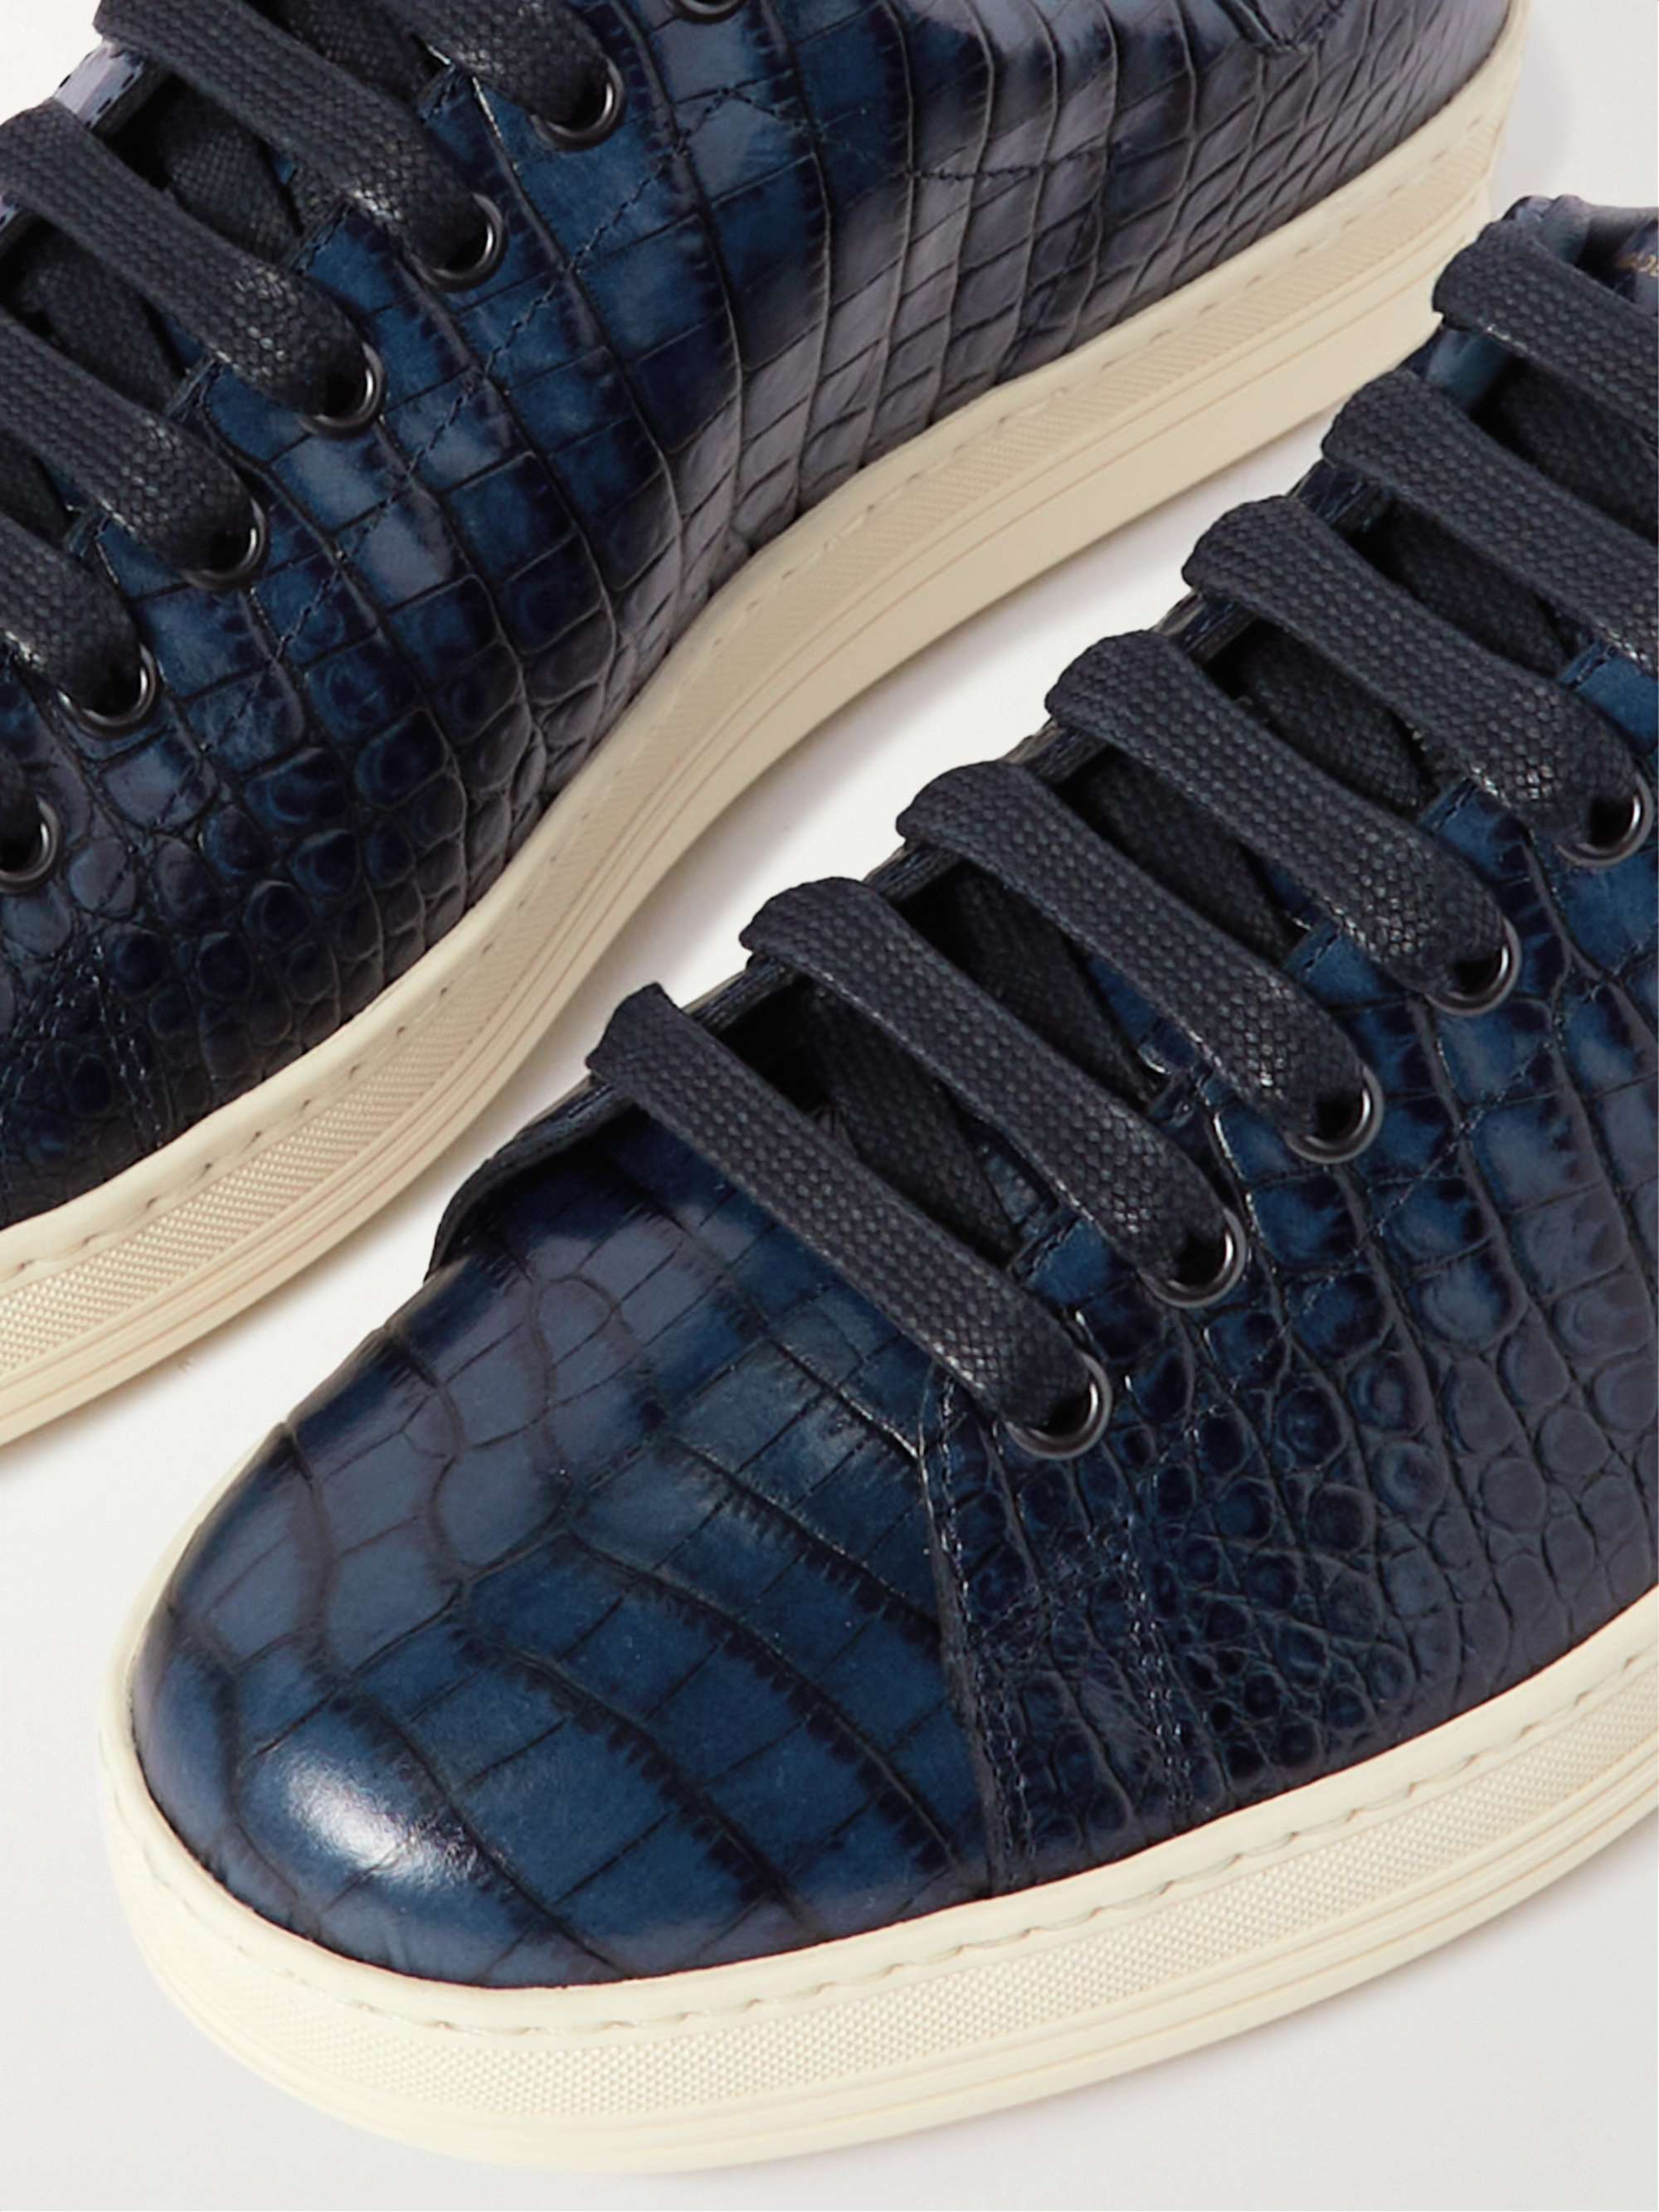 TOM FORD Warwick Croc-Effect Leather Sneakers